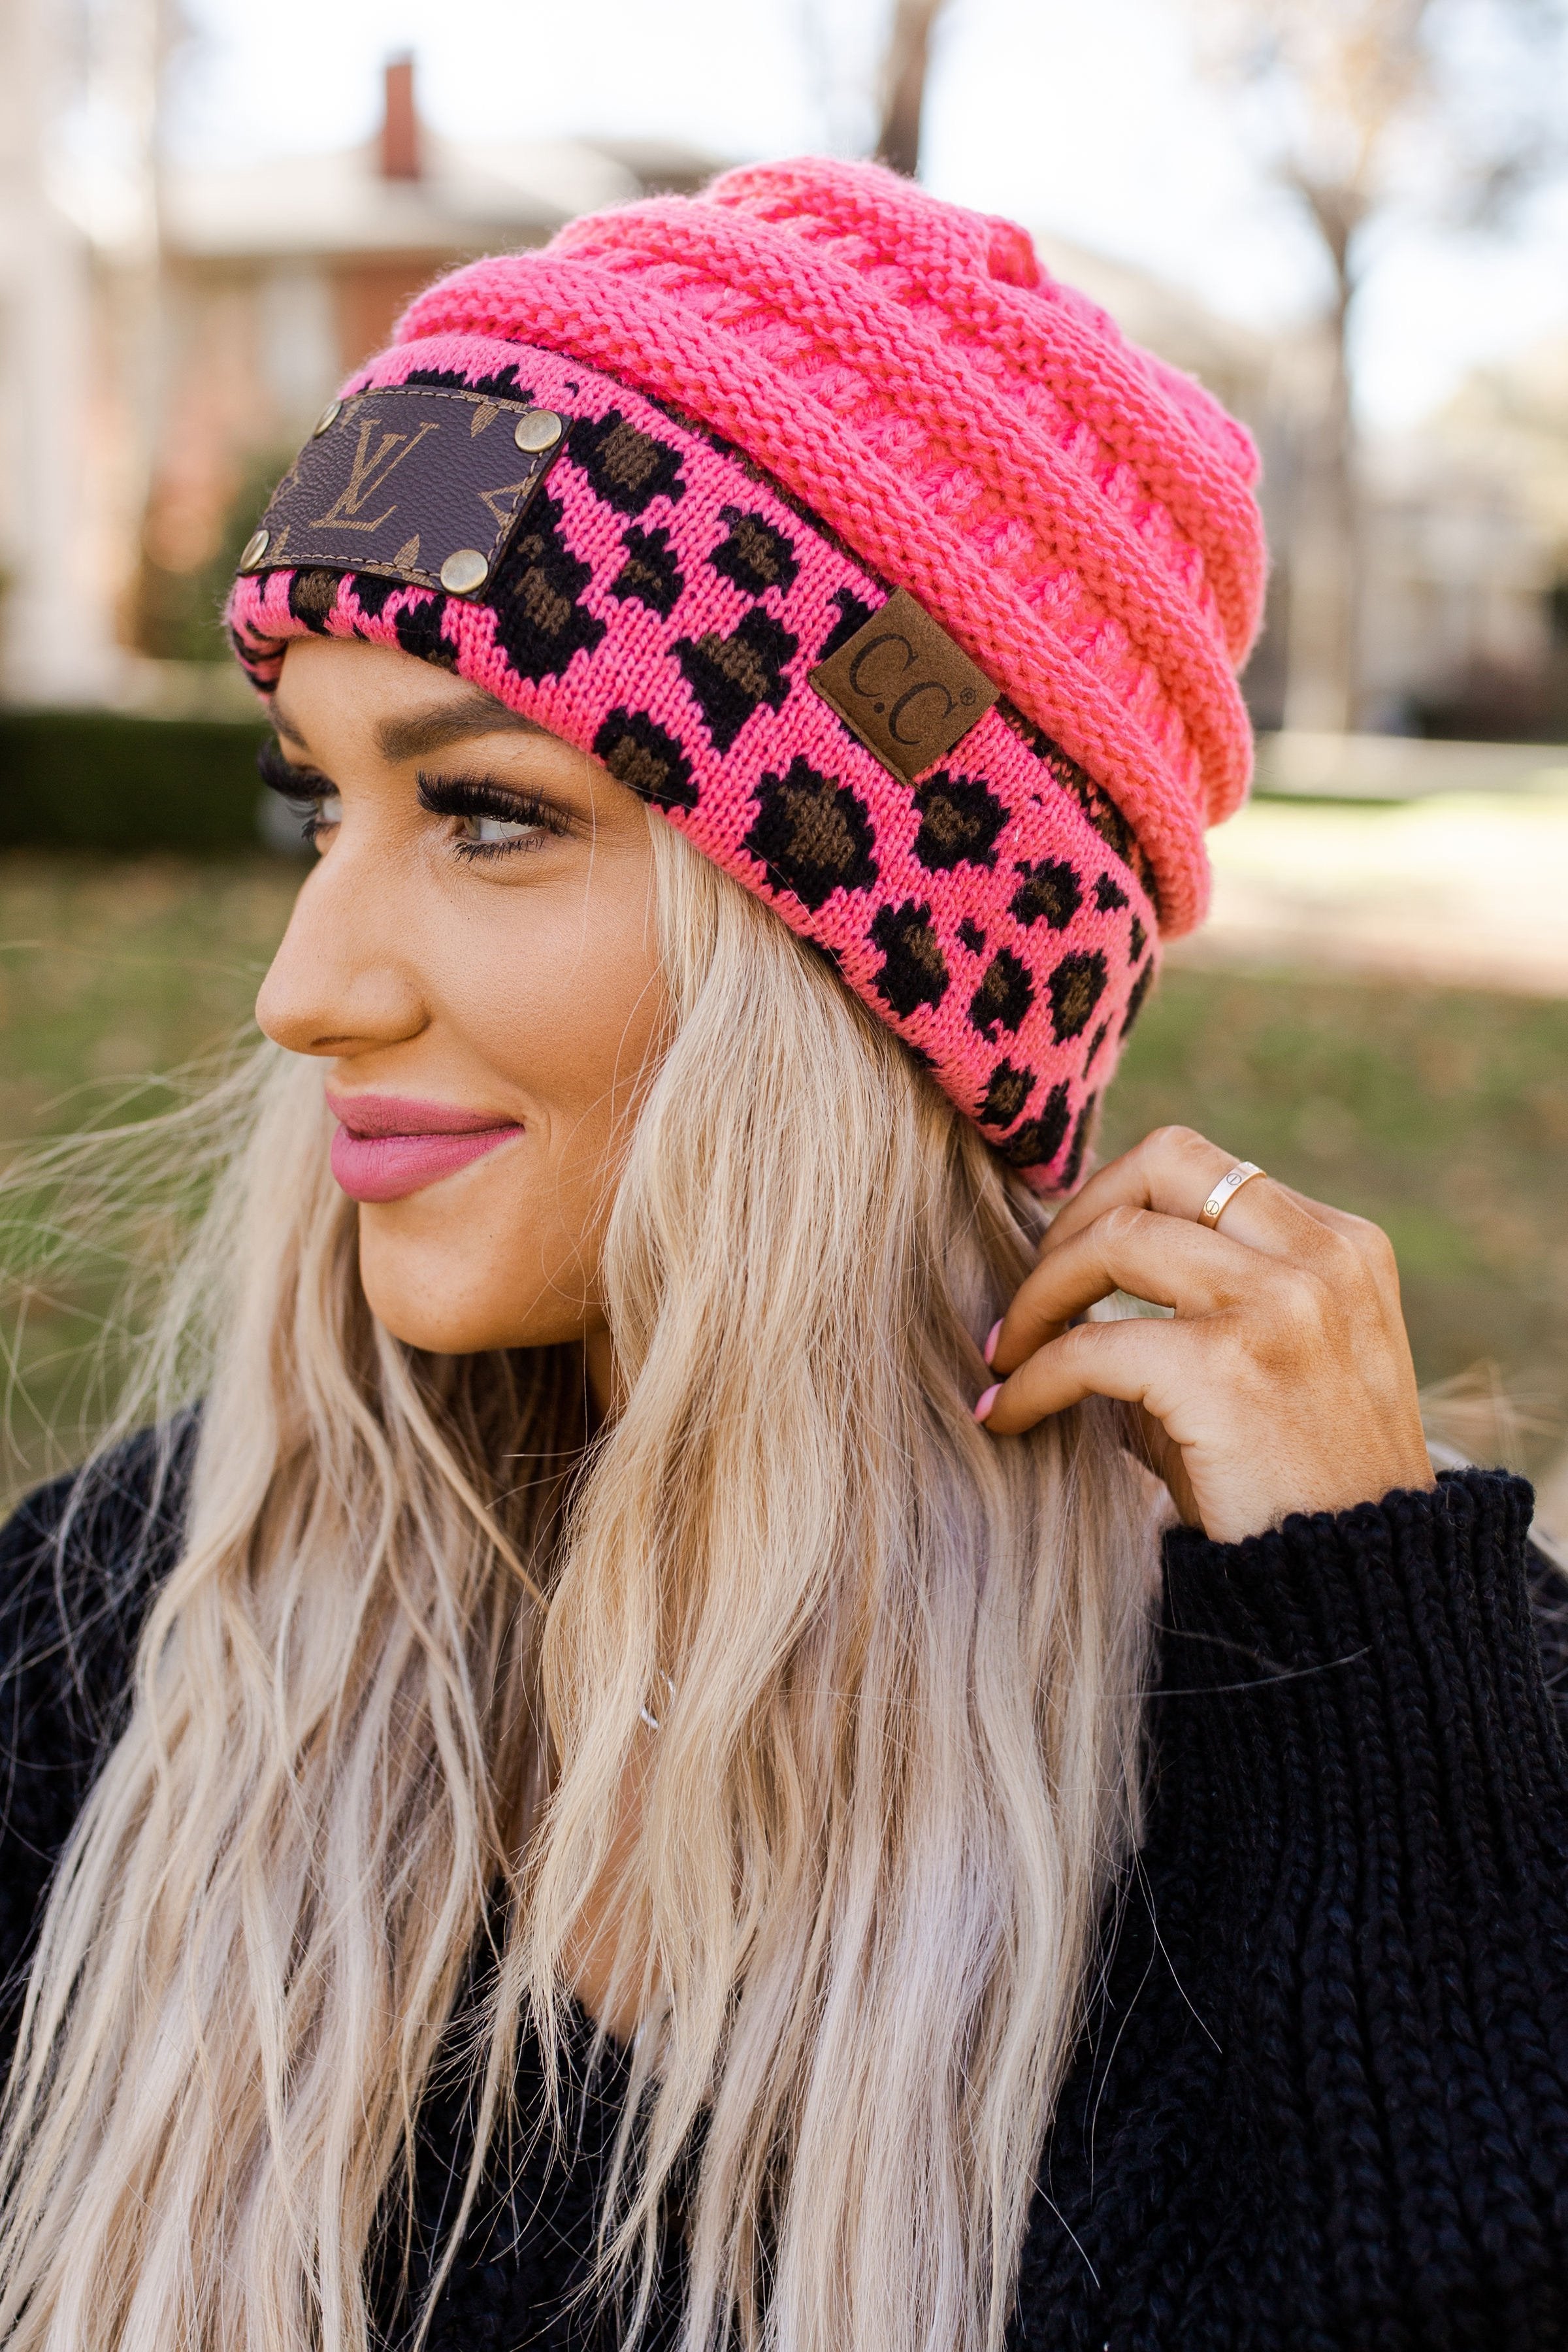 Upcycled Red Knitted LV Beanie – Gypsy Sun & Boutique